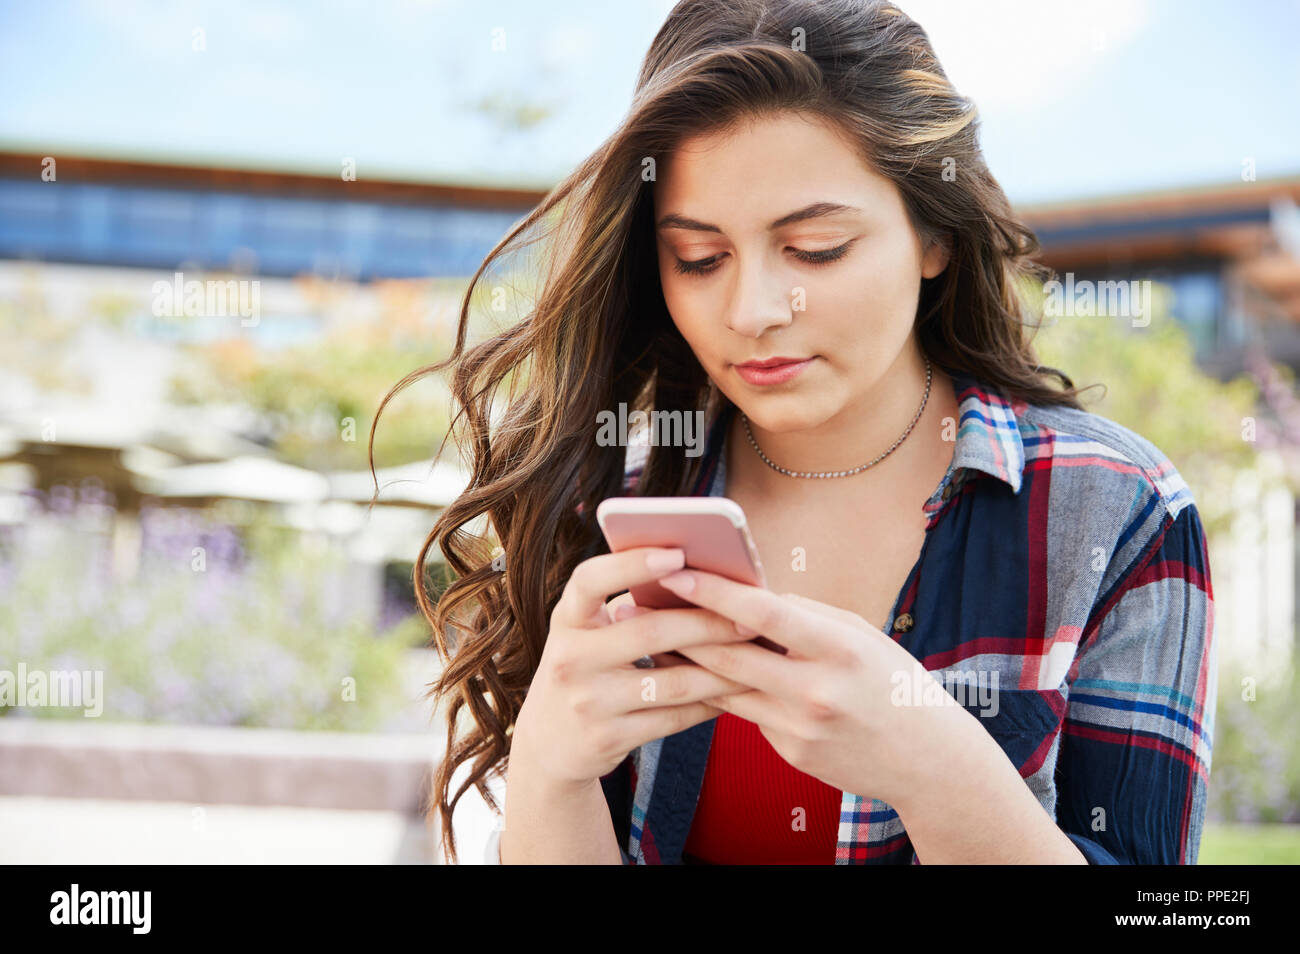 Female High School Student Checking Messages On Mobile Phone Outside College Buildings Stock Photo